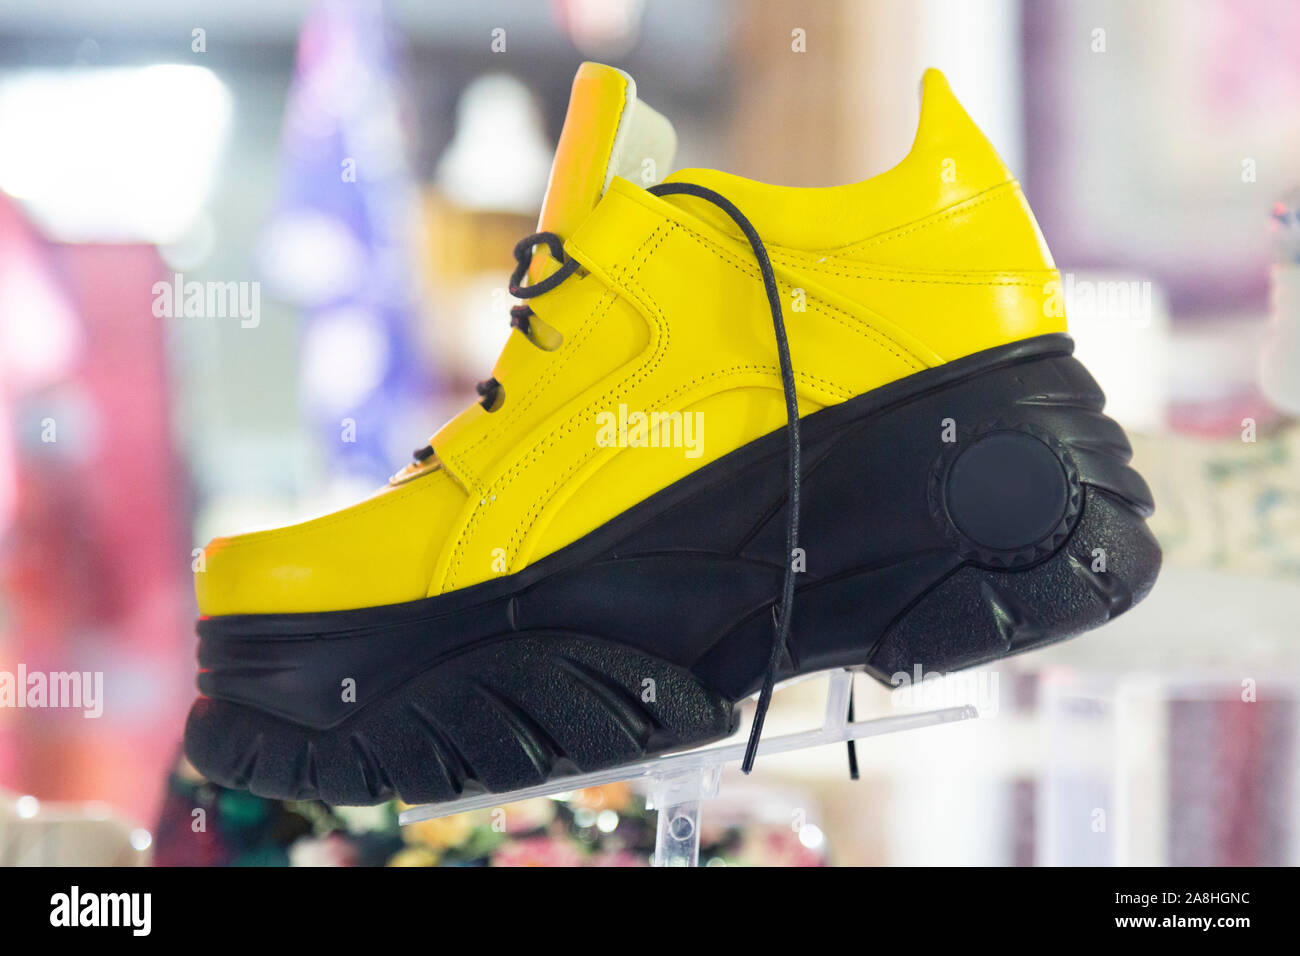 Very high big sole on yellow women's shoes Stock Photo - Alamy